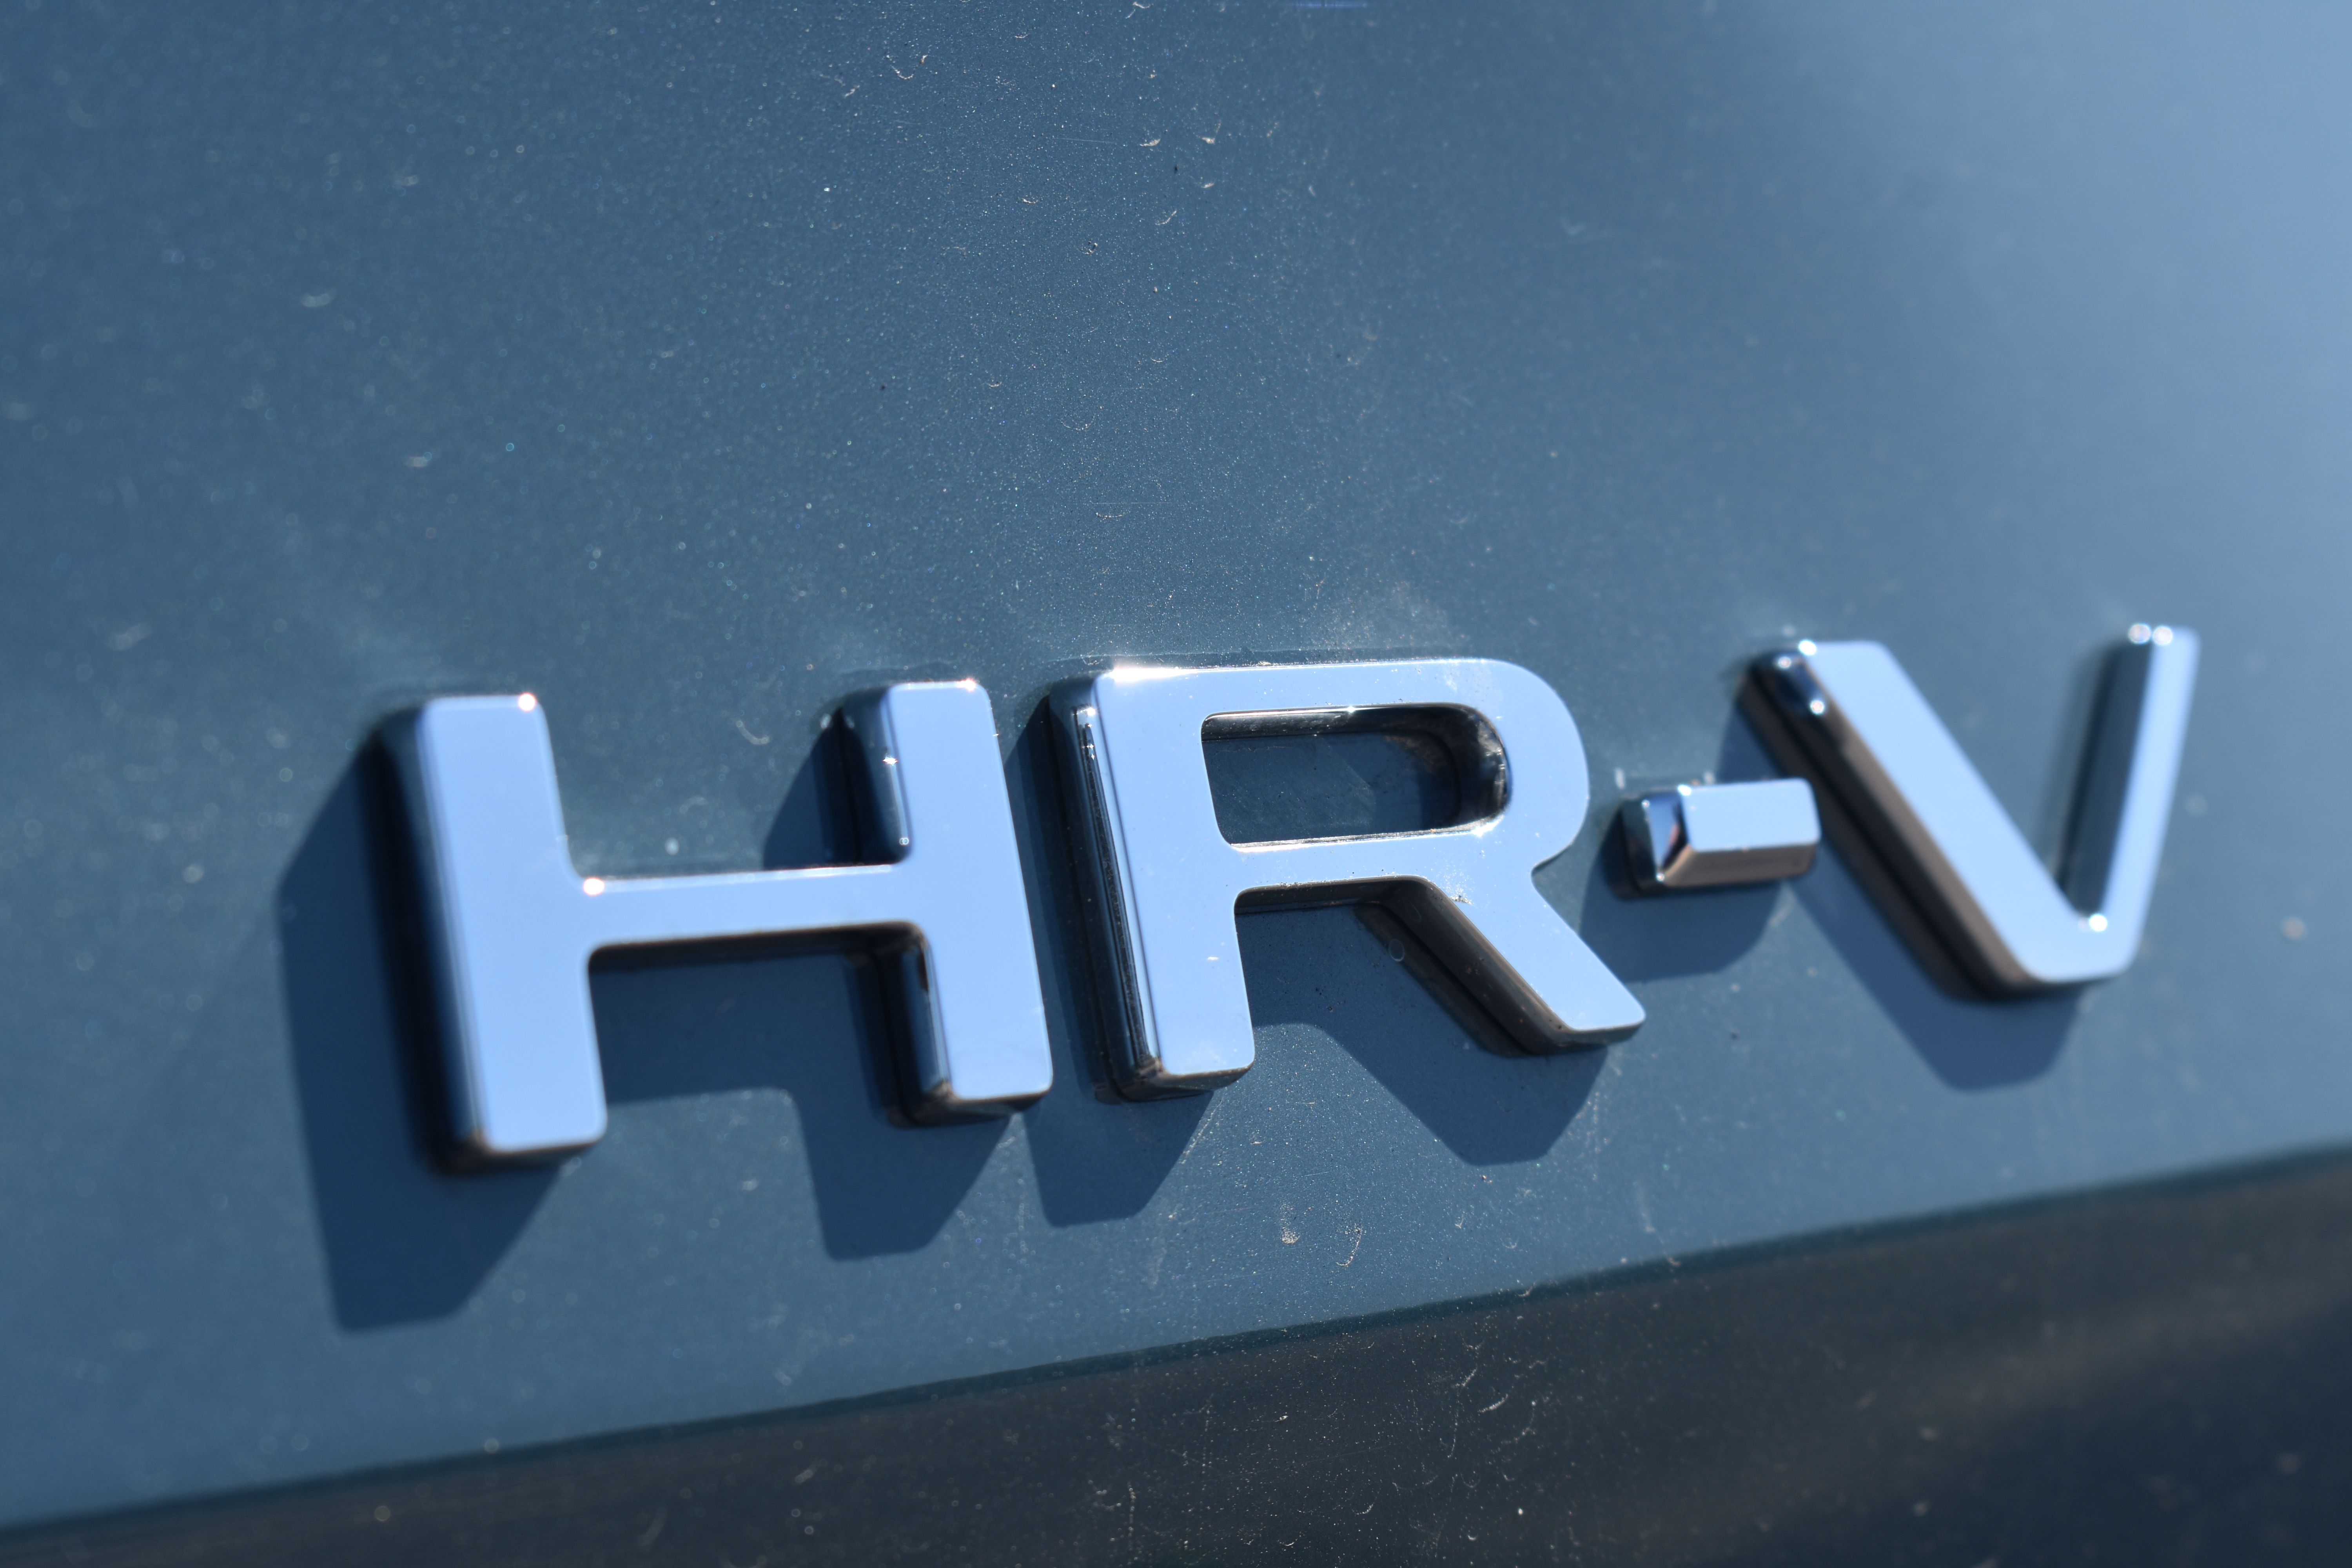 2023 Honda HR-V Review: A Desirable Subcompact SUV With Few Flaws